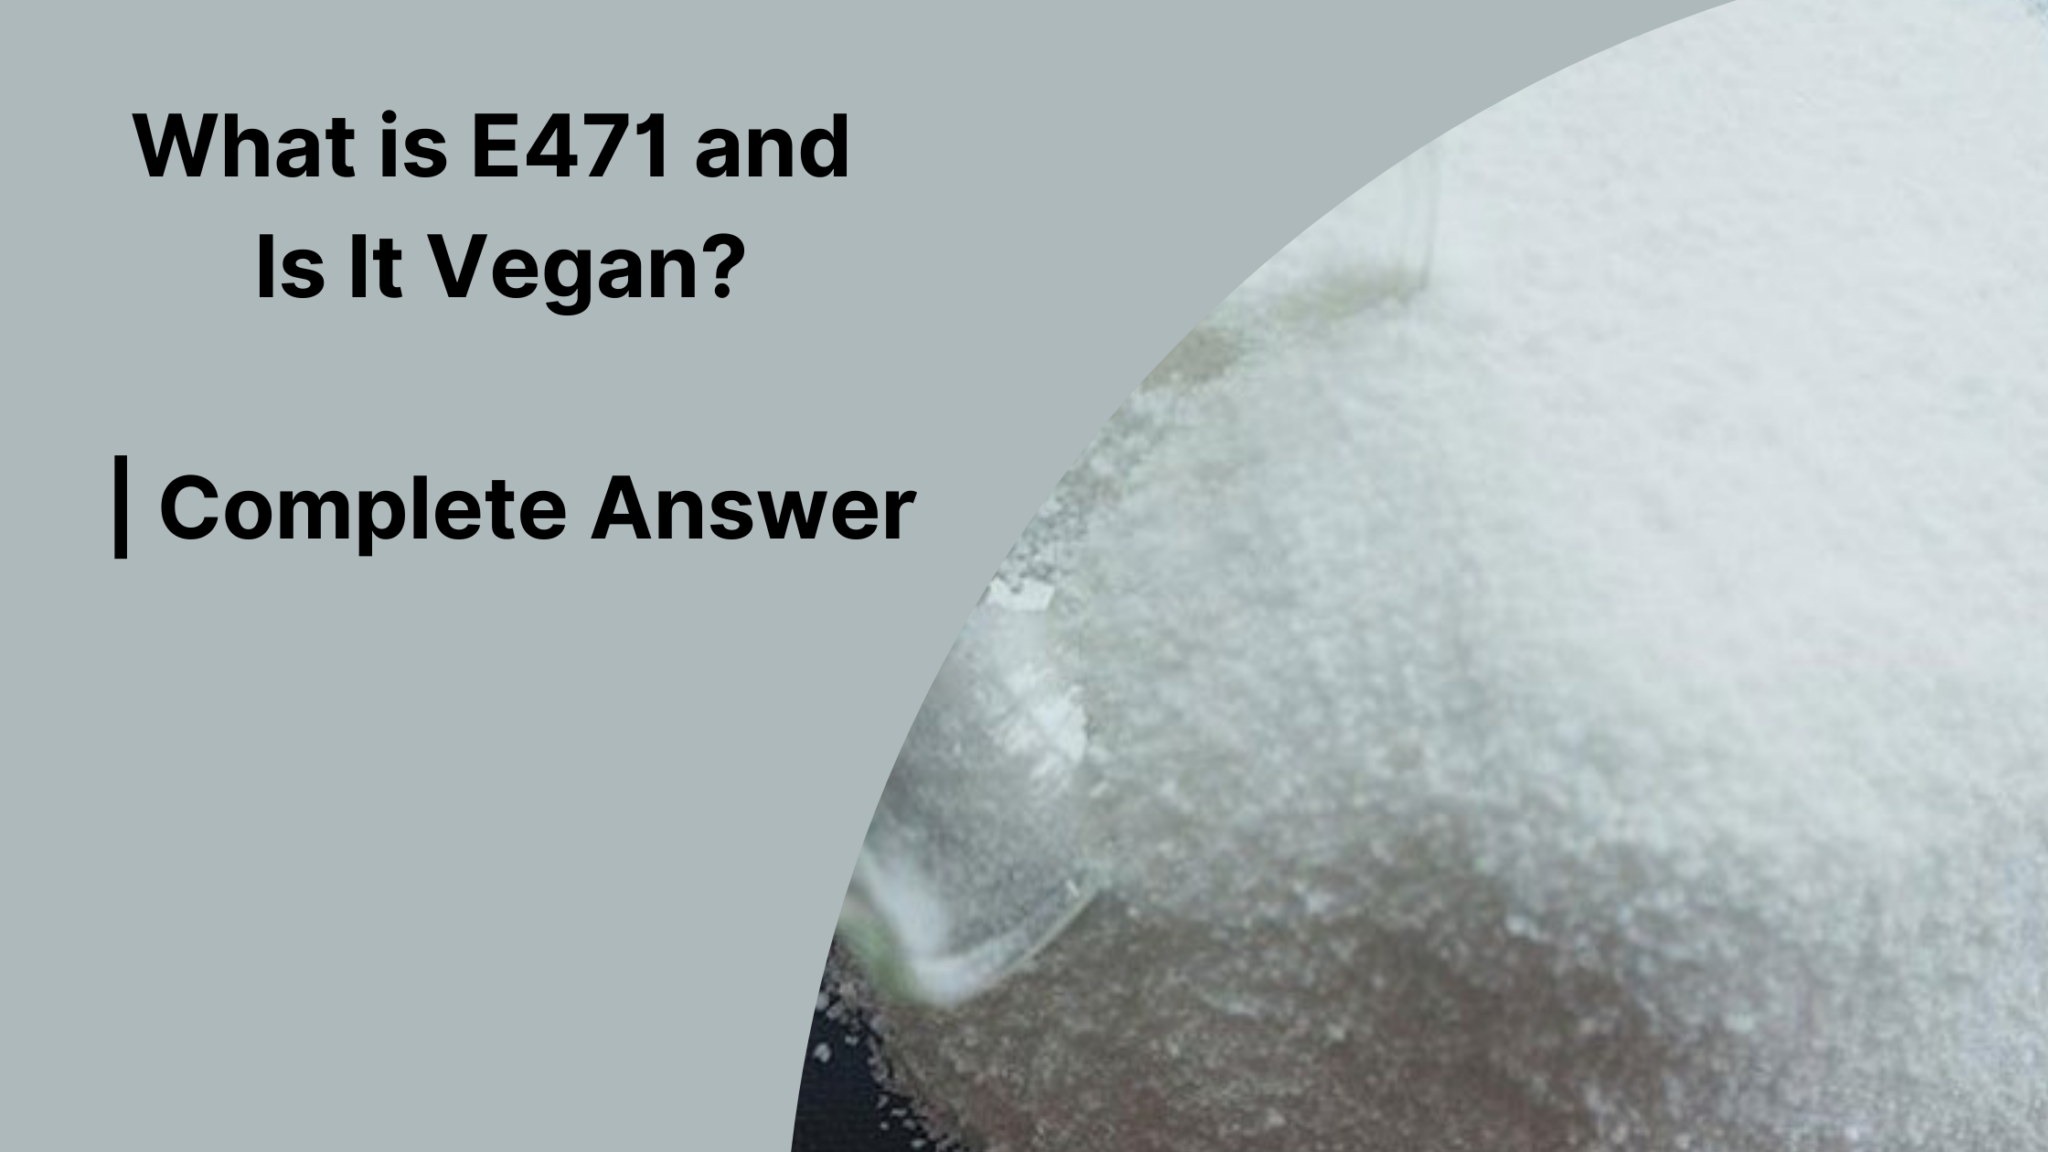 What is E471 and is it Vegan?